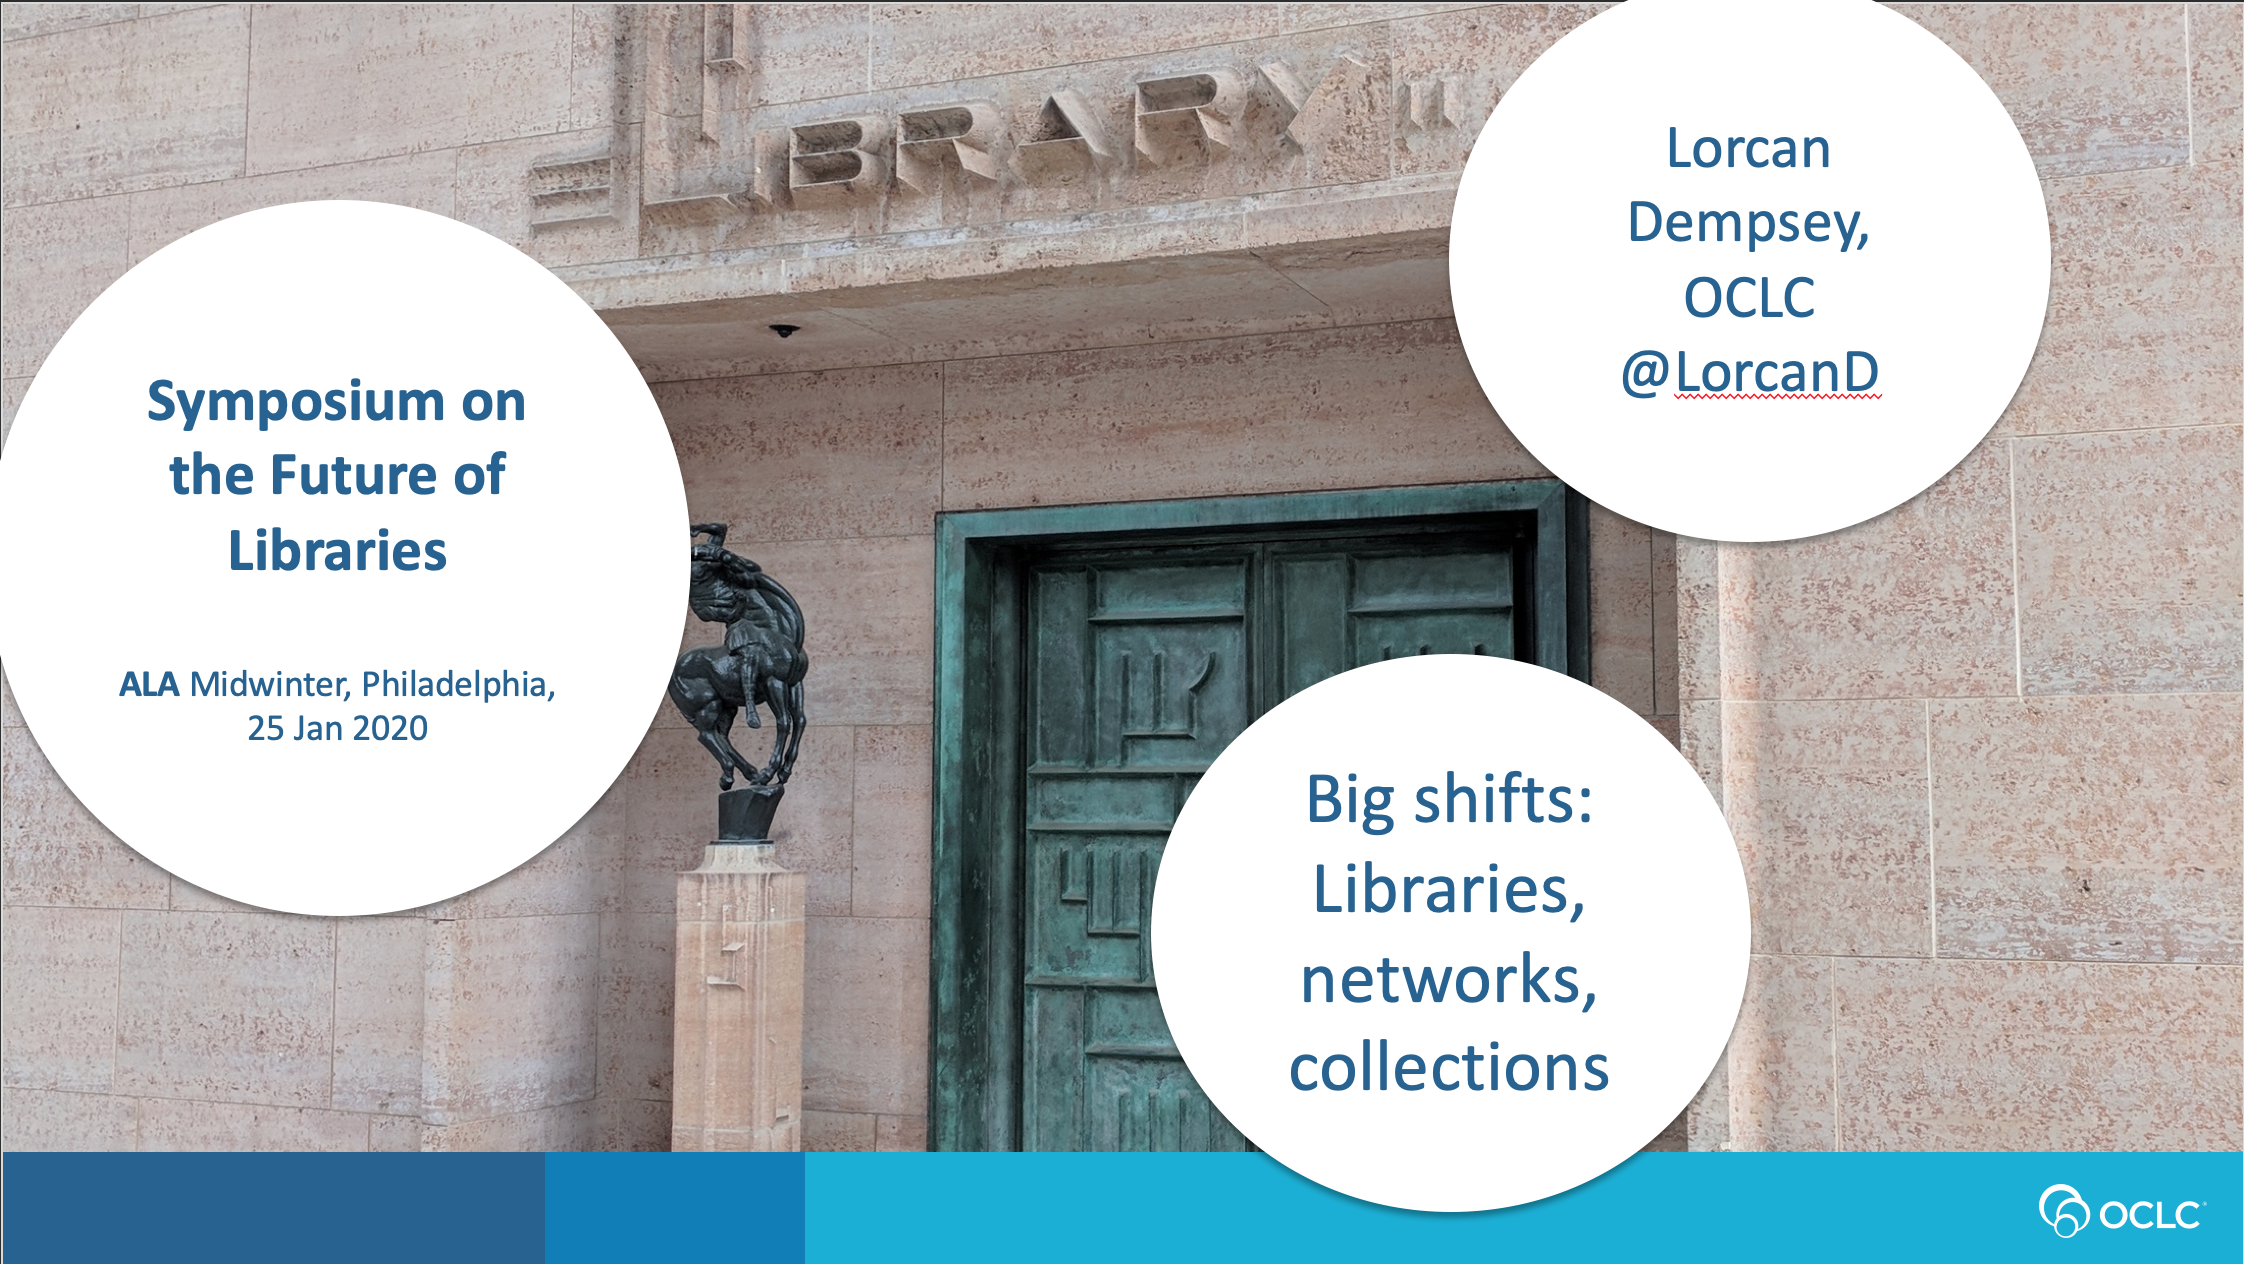 Big Shifts: Libraries, Collections, Networks